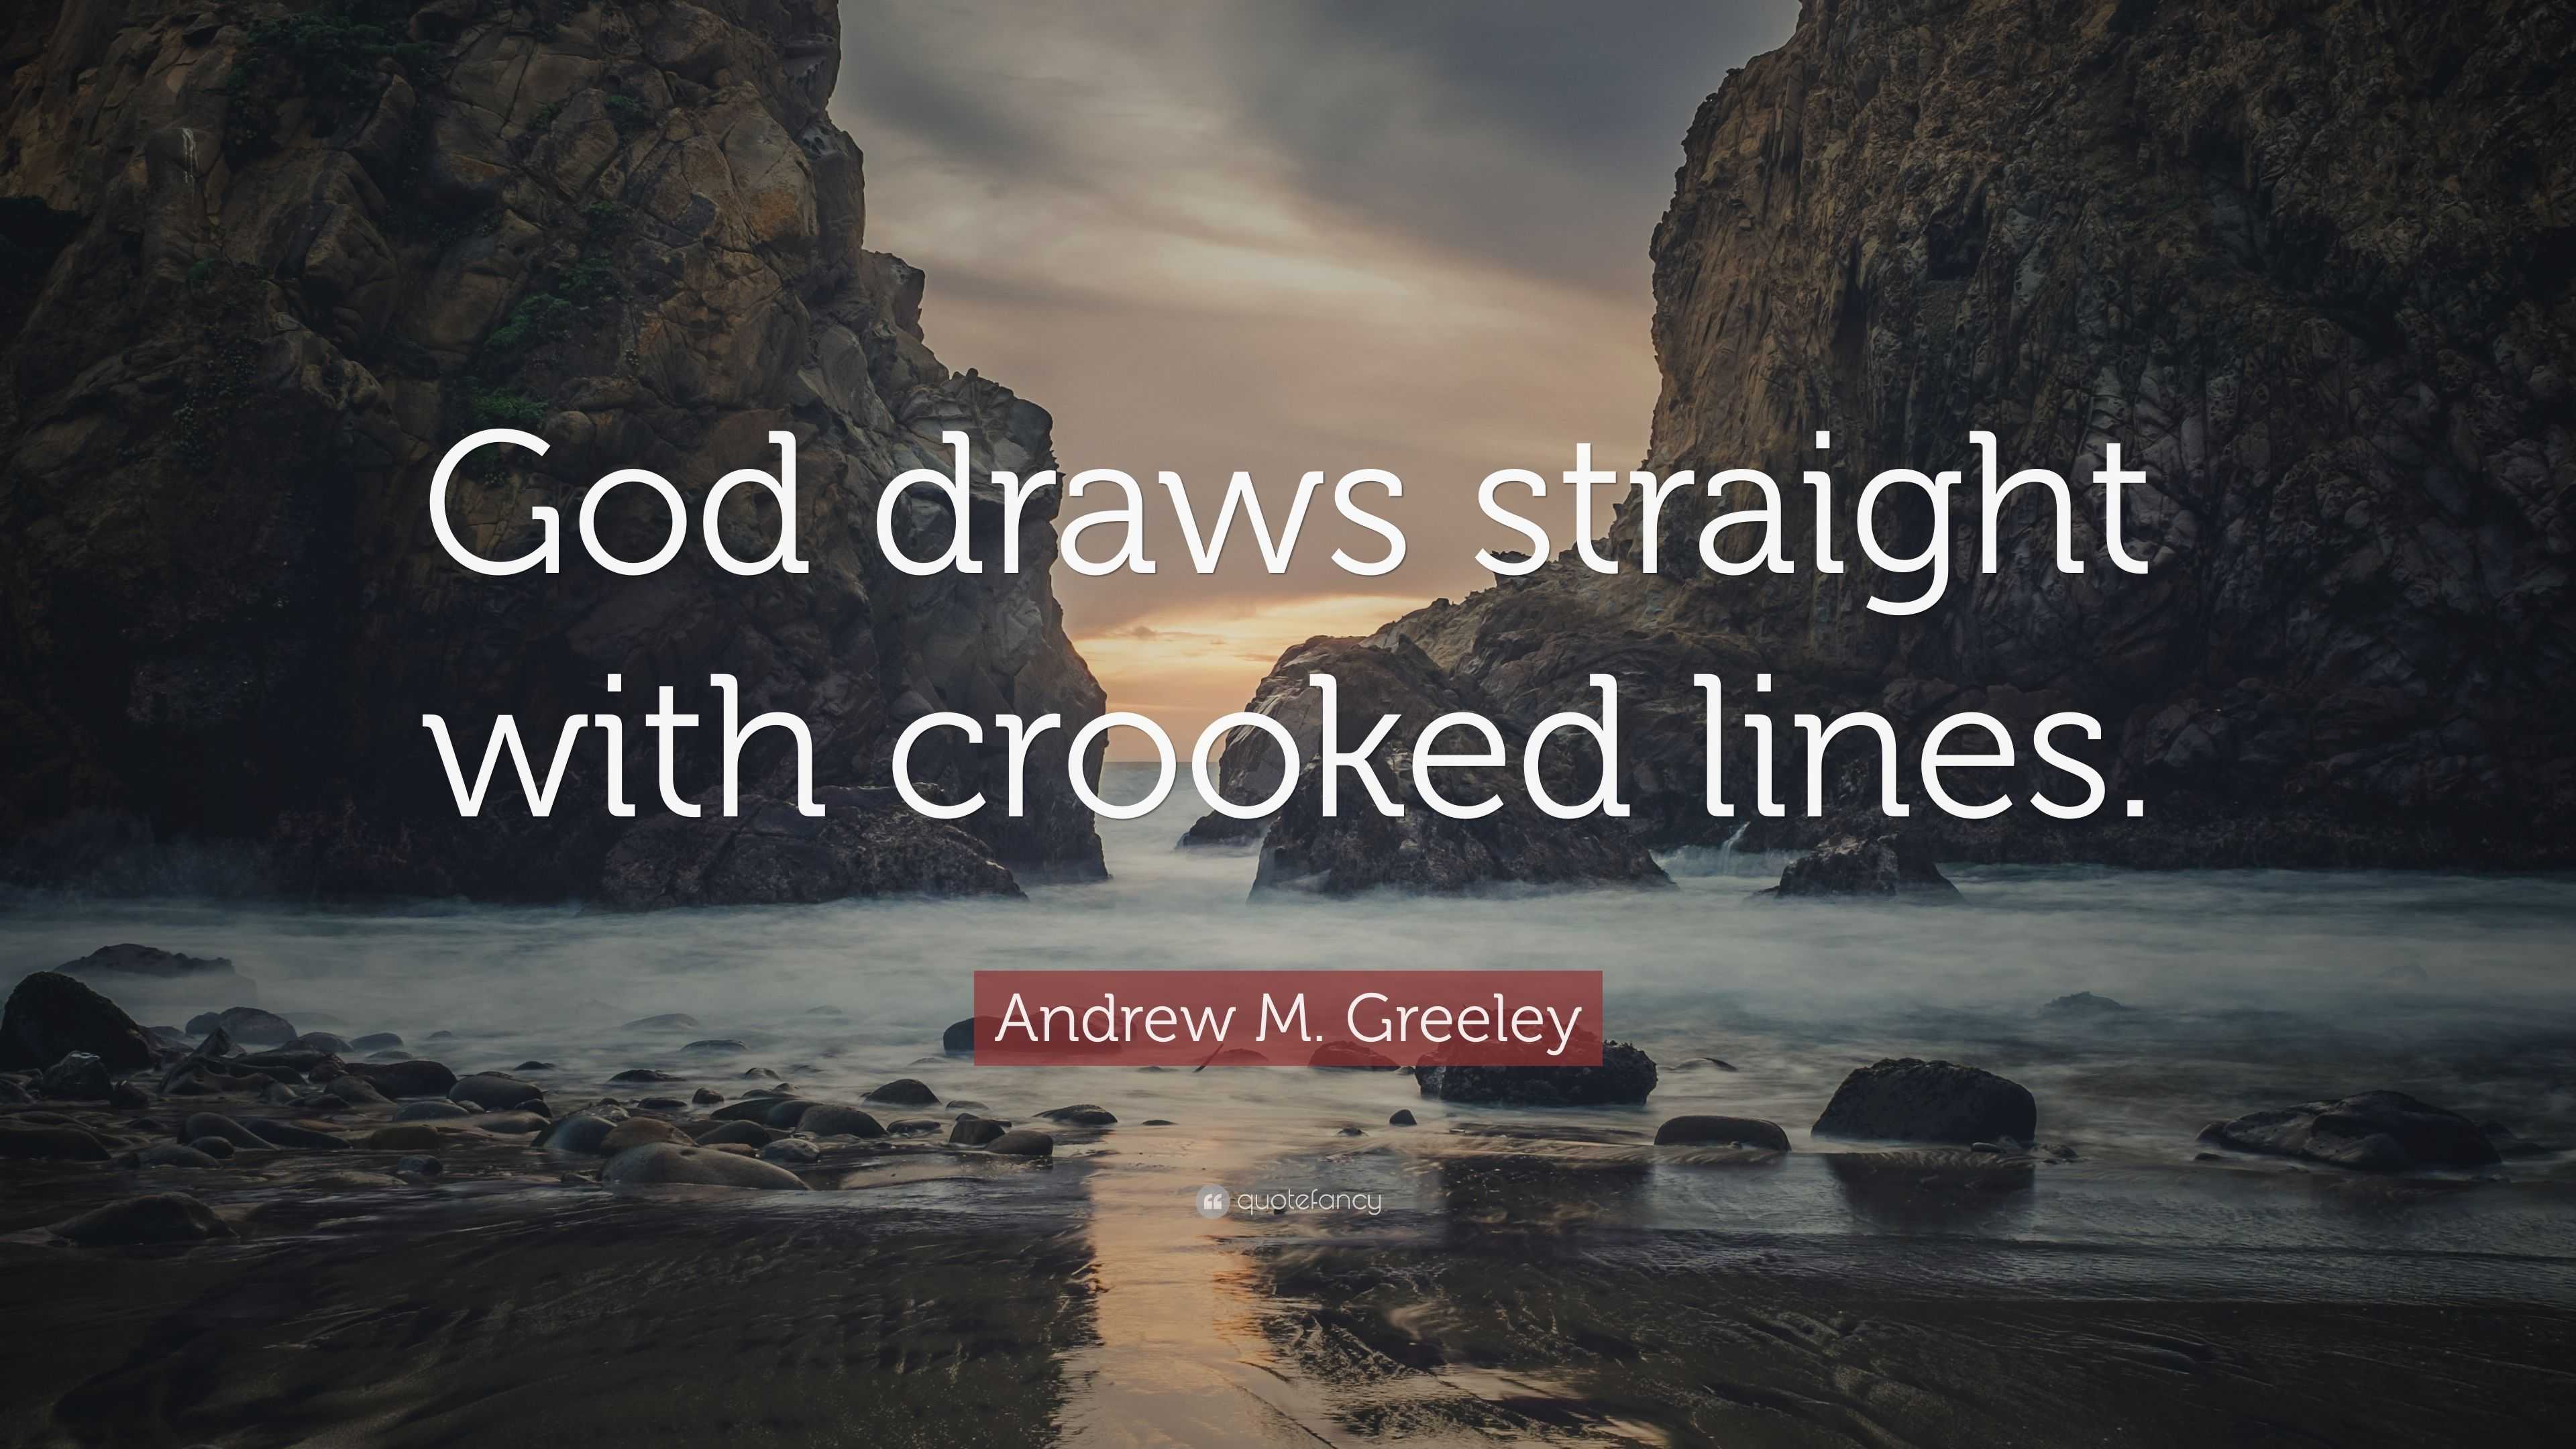 Andrew M. Greeley Quote “God draws straight with crooked lines.”